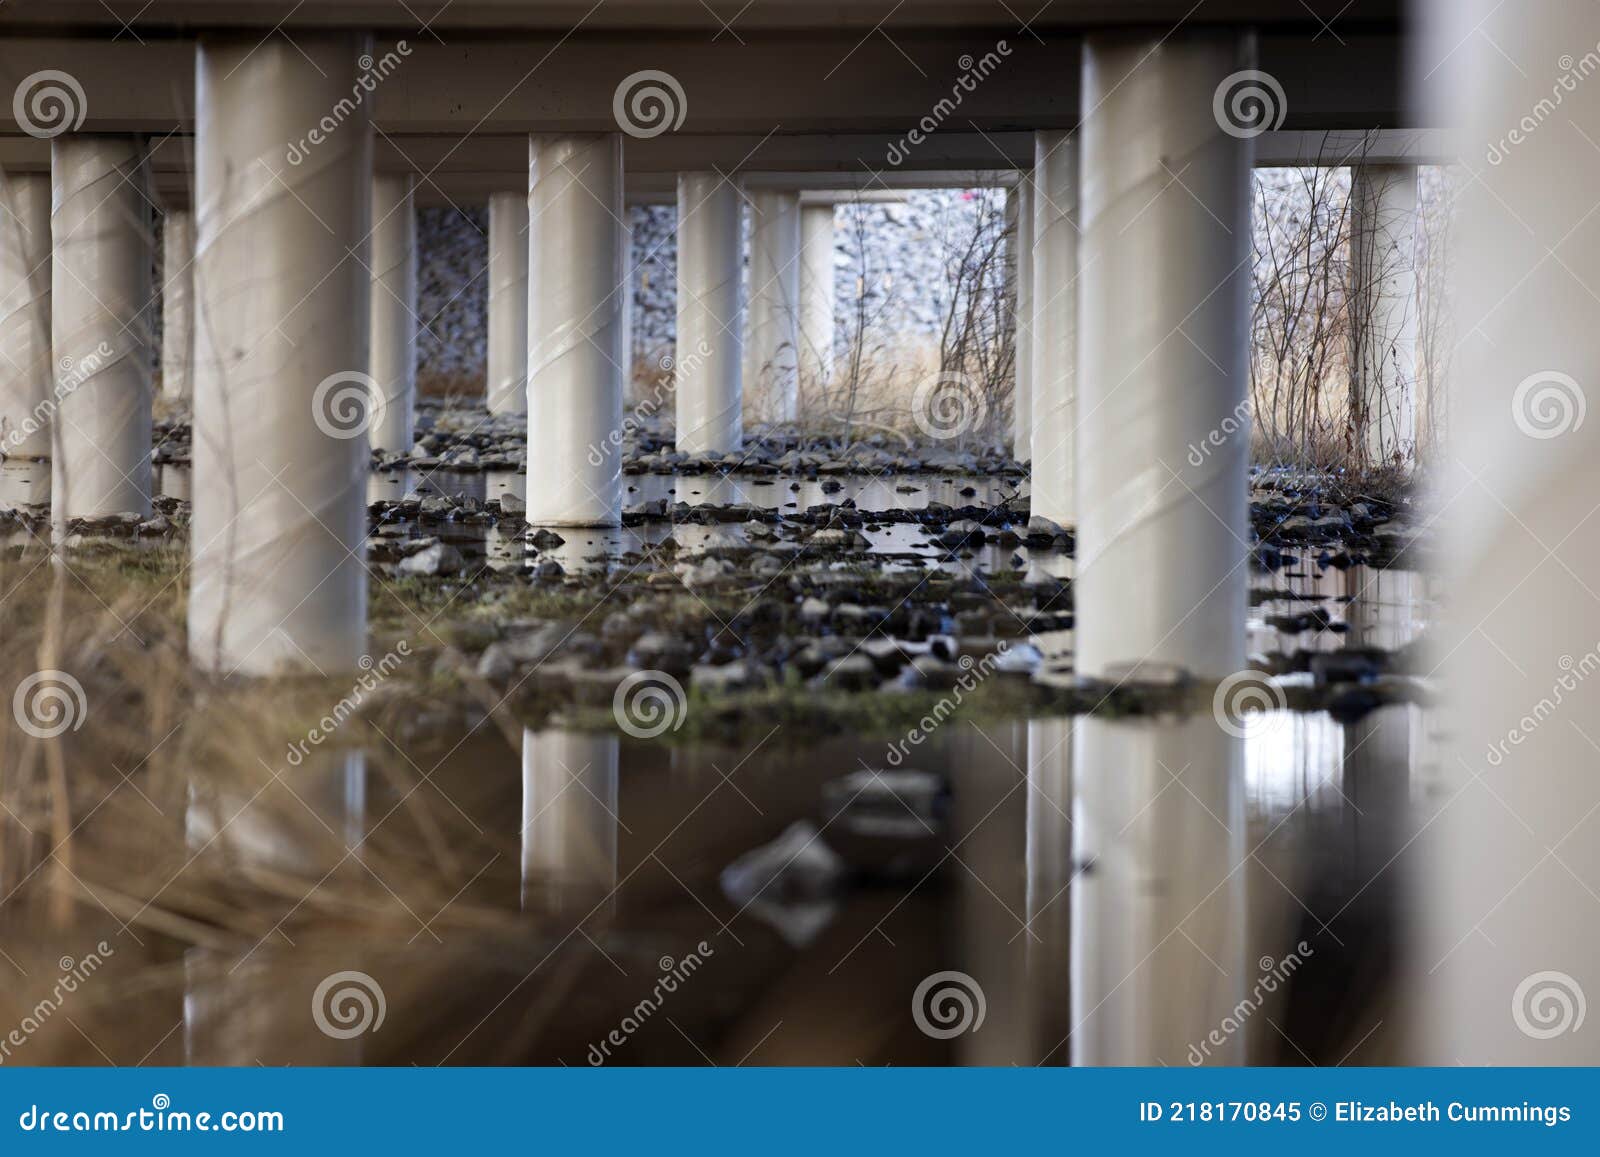 many tall concrete columns reflected underneath an overpass water flow nature conservancy